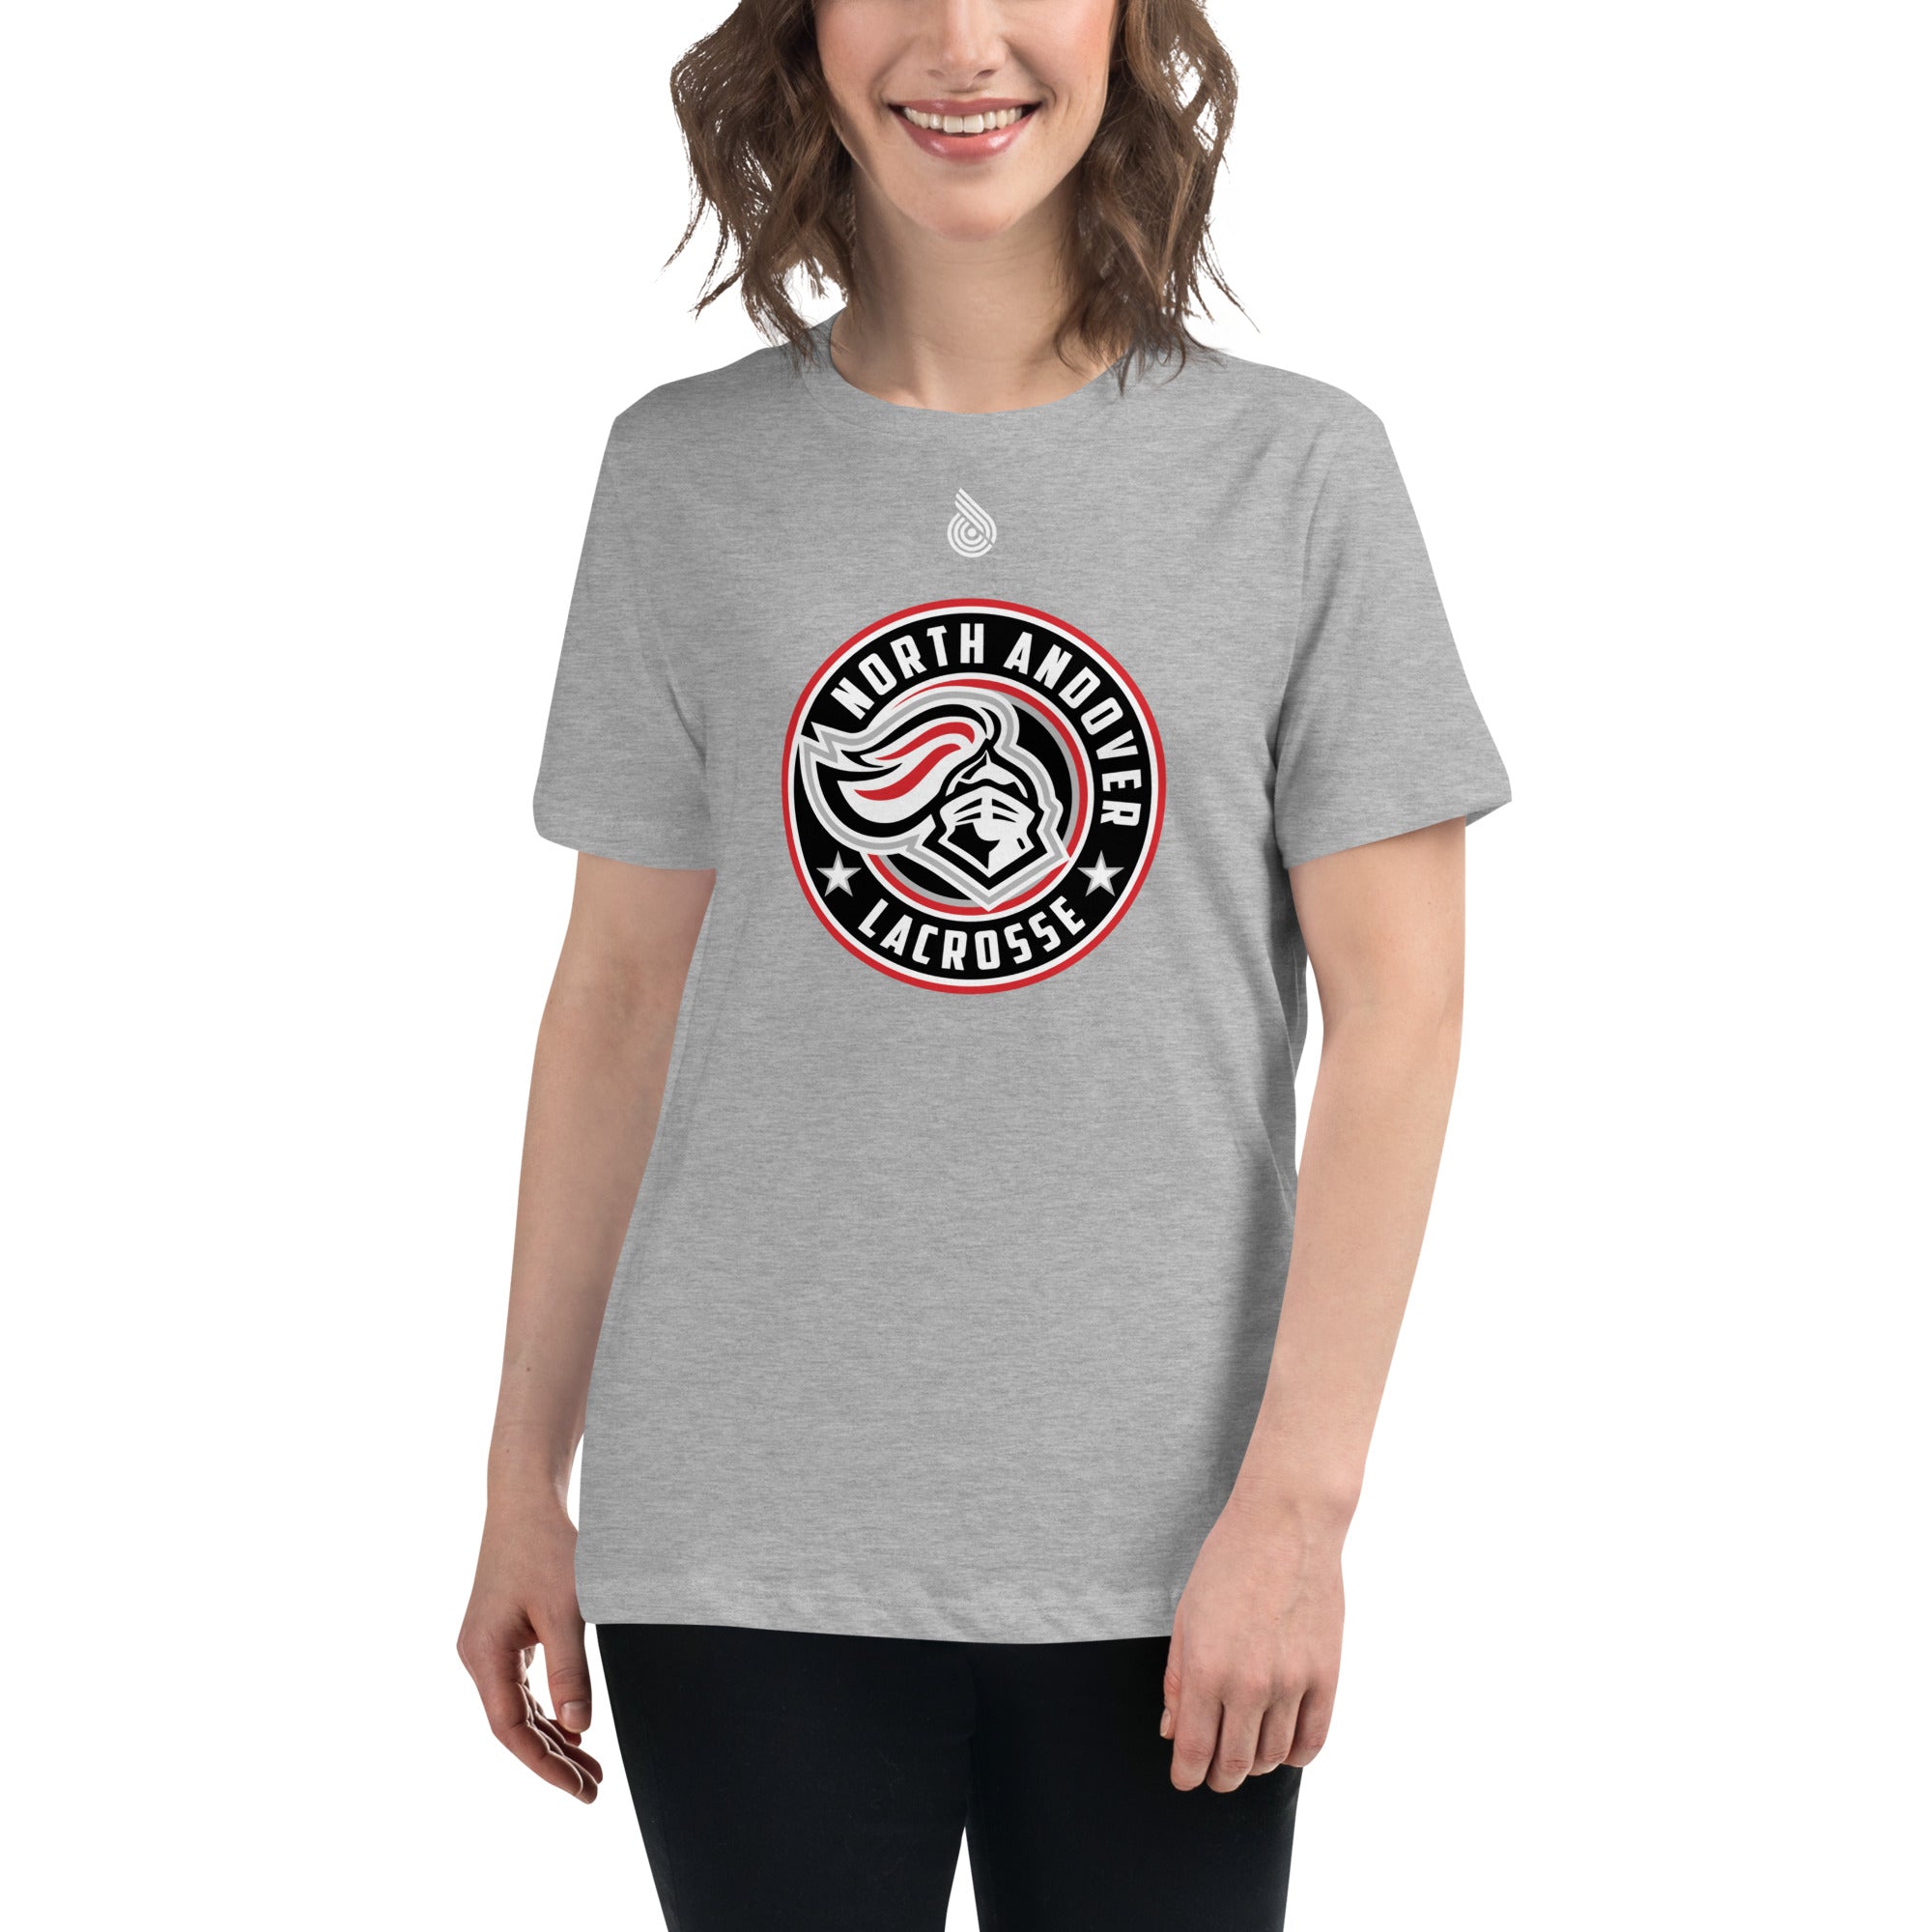 North Andover Women's Relaxed T-Shirt